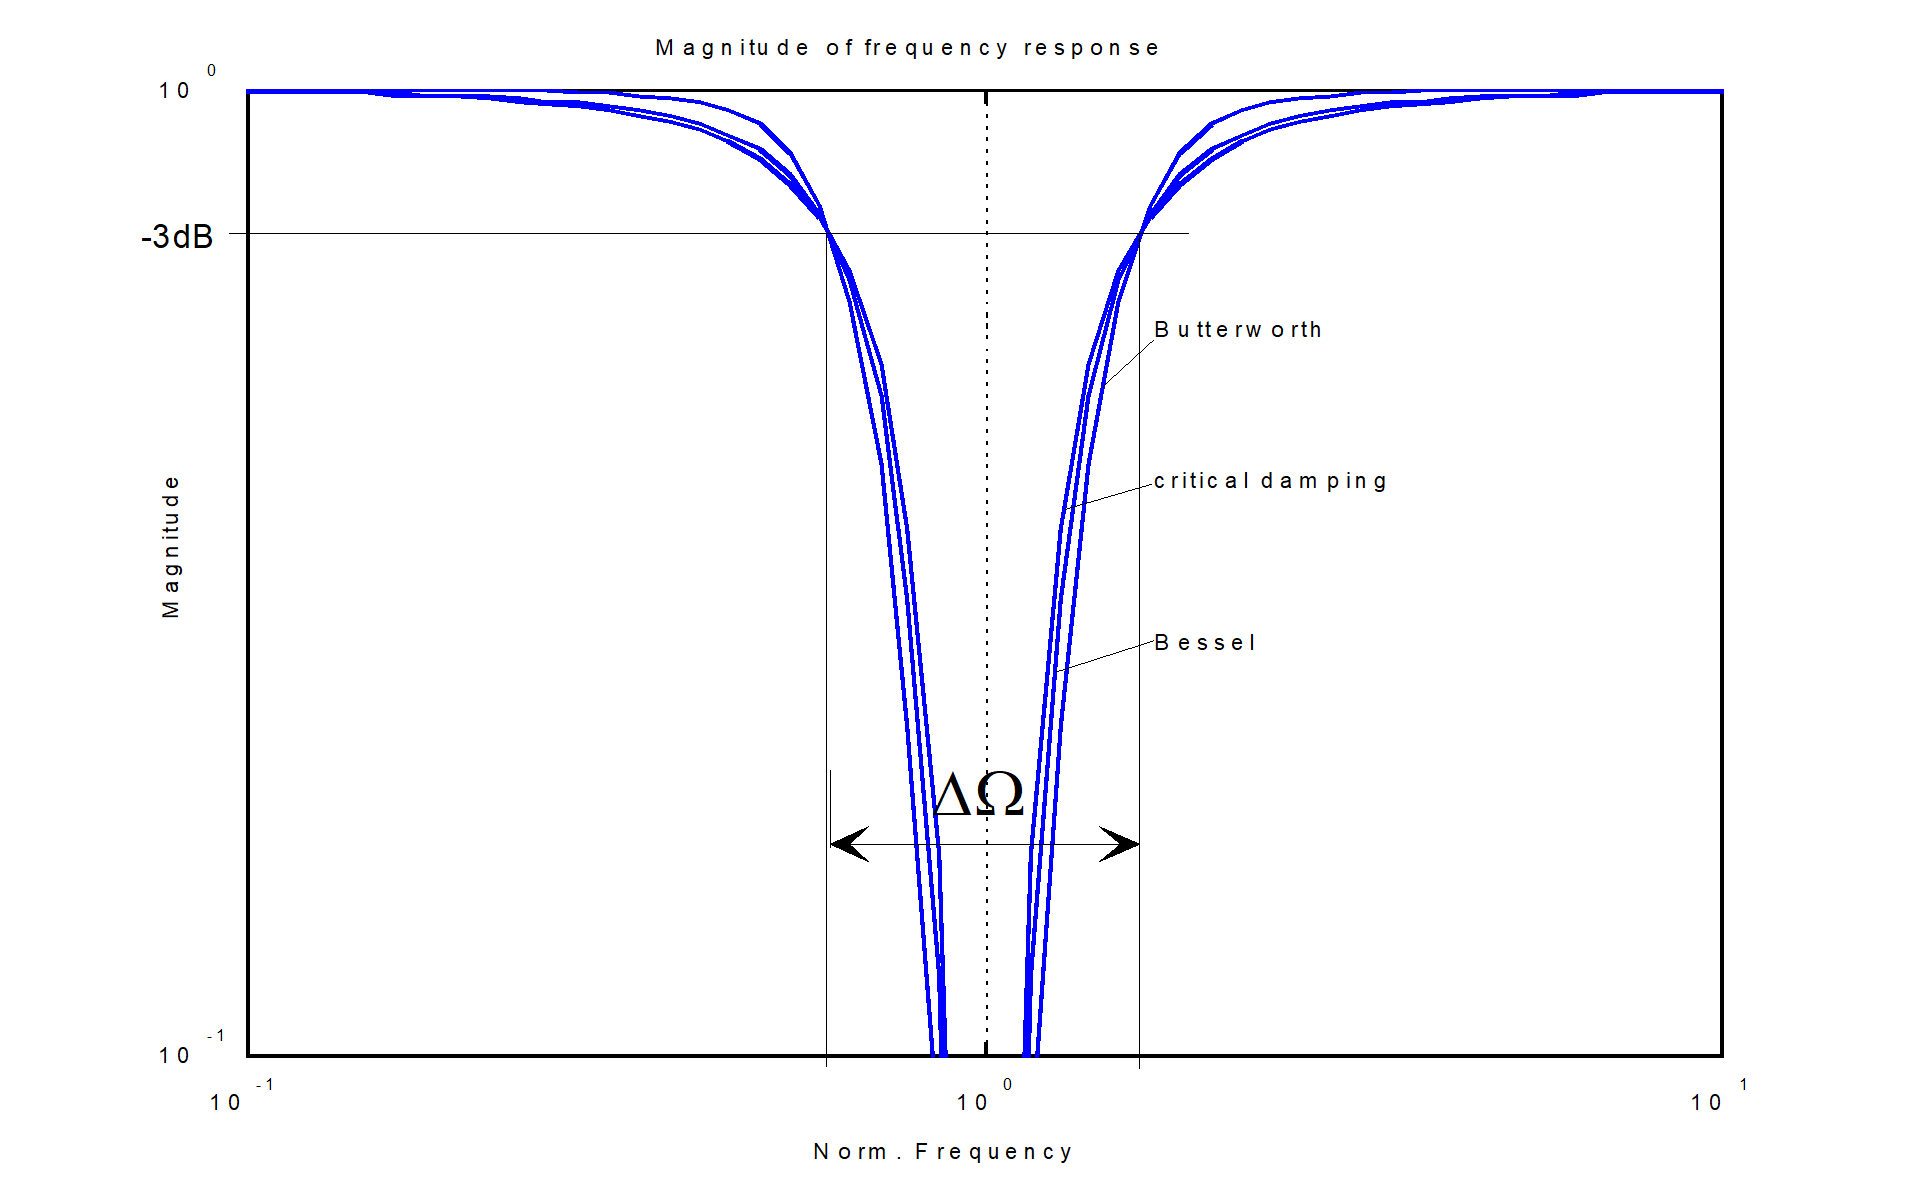 Amplitude frequency response of band-stop filters (4th order, quality = 1)